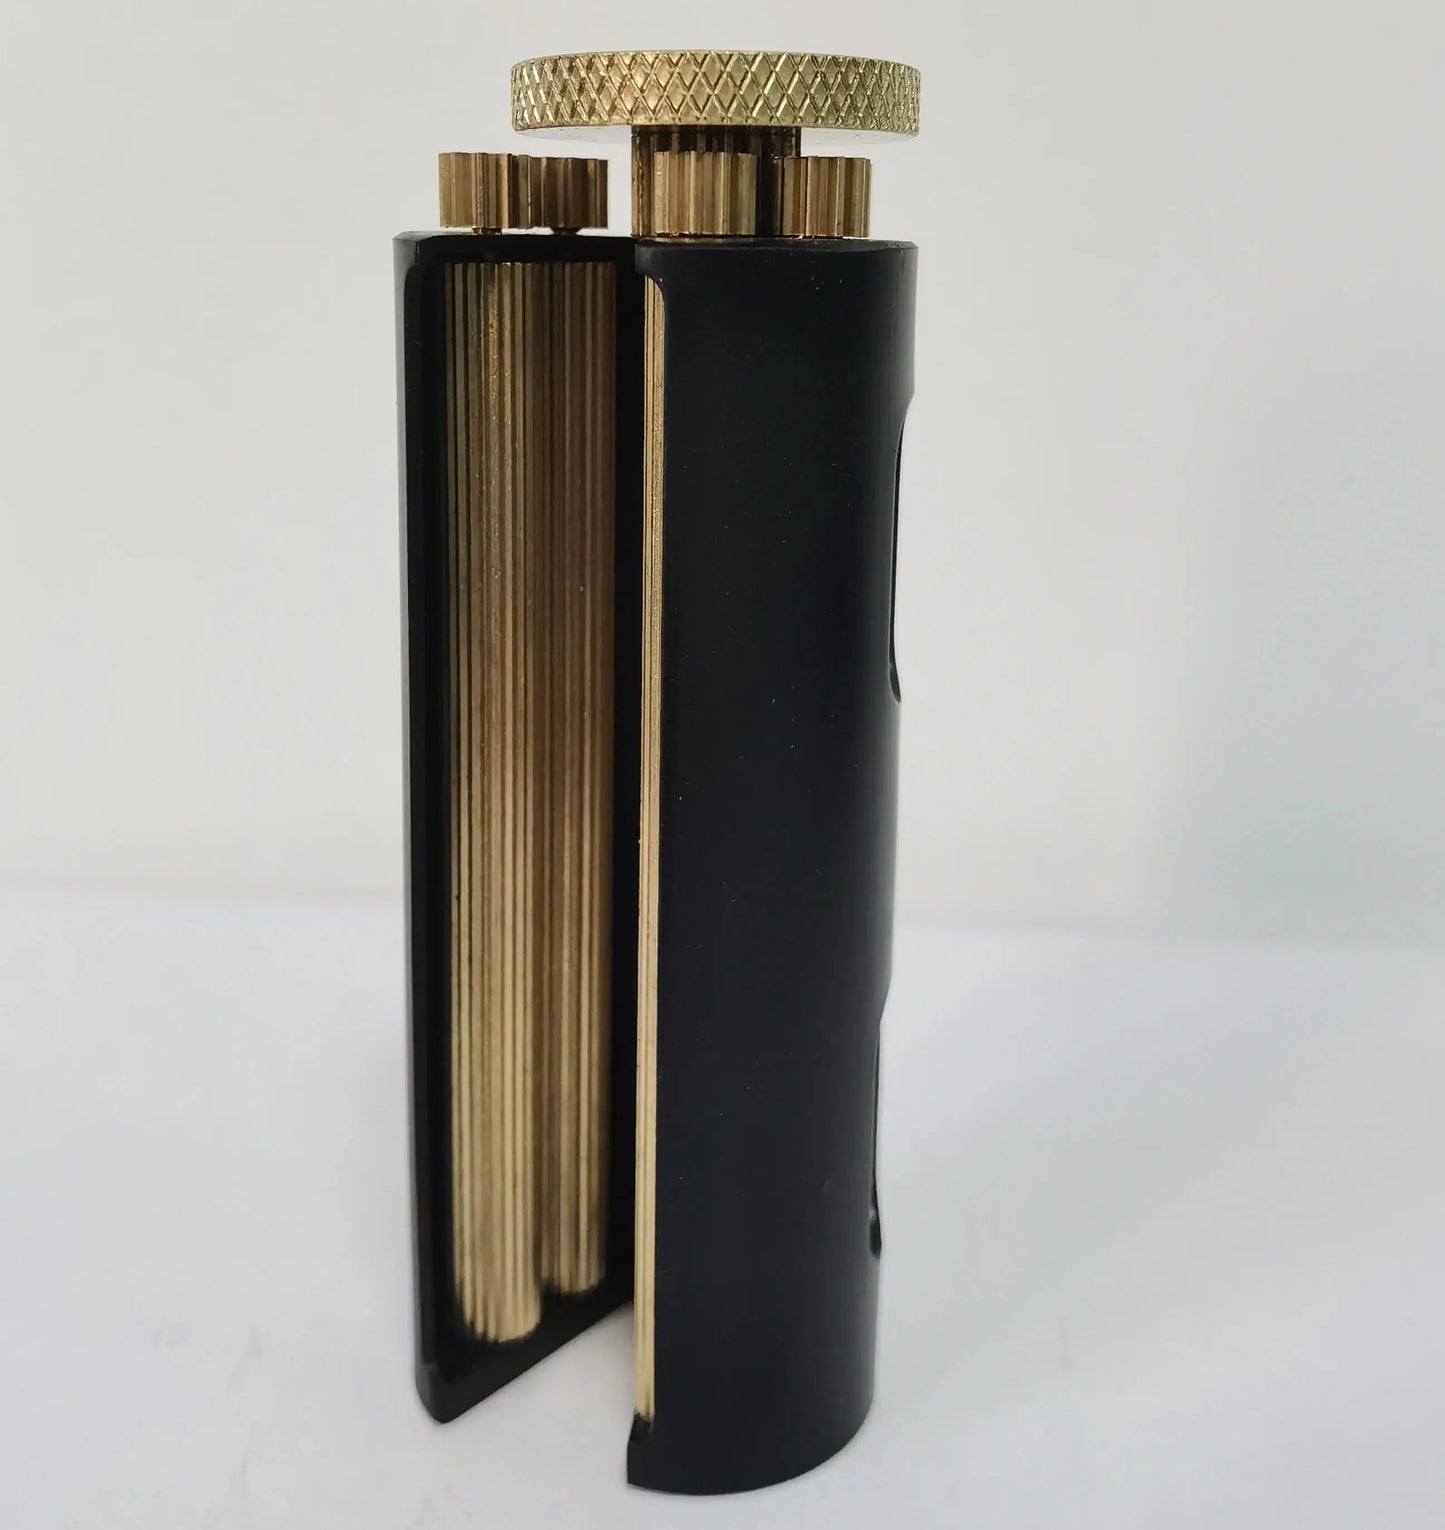 Handmade Brass Rolling Cigarette Machine Bearing Gear Rotation Vintage Cylinder Cigarette Wrapping Machine for 70MM * Φ 8Mm